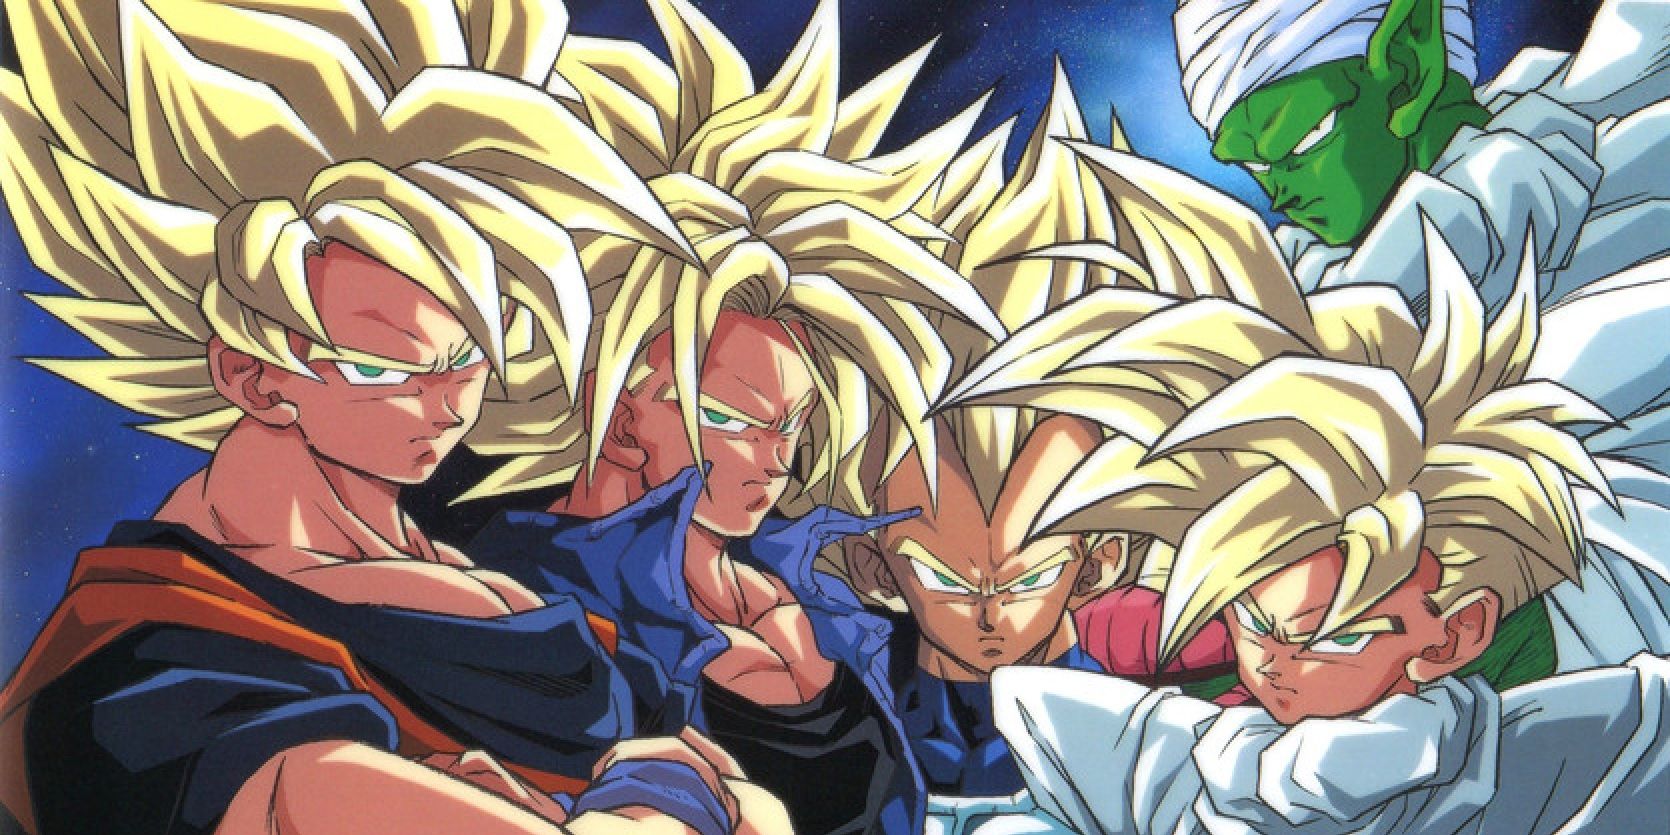 Dragon Ball's Most Powerful Super Saiyan Form Is Officially Unauthorized